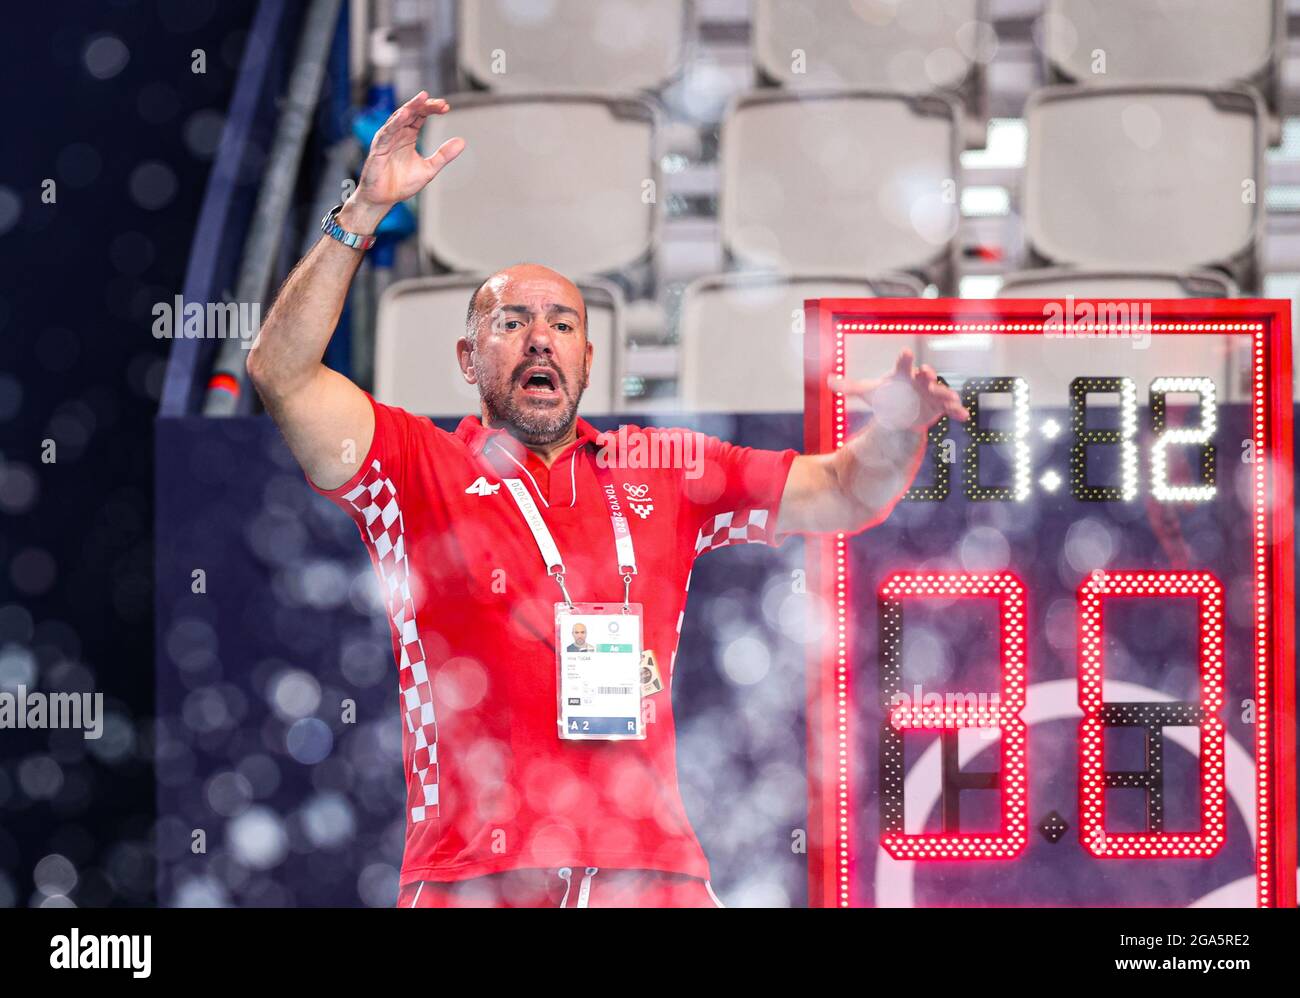 Tokyo, Japan. 29th July, 2021. Croatia's head coach Ivica Tucak reacts during the men's preliminary round match of Water Polo between Croatia and Montenegro at the Tokyo 2020 Olympic Games in Tokyo, Japan, on July 29, 2021. Credit: Wang Jingqiang/Xinhua/Alamy Live News Stock Photo